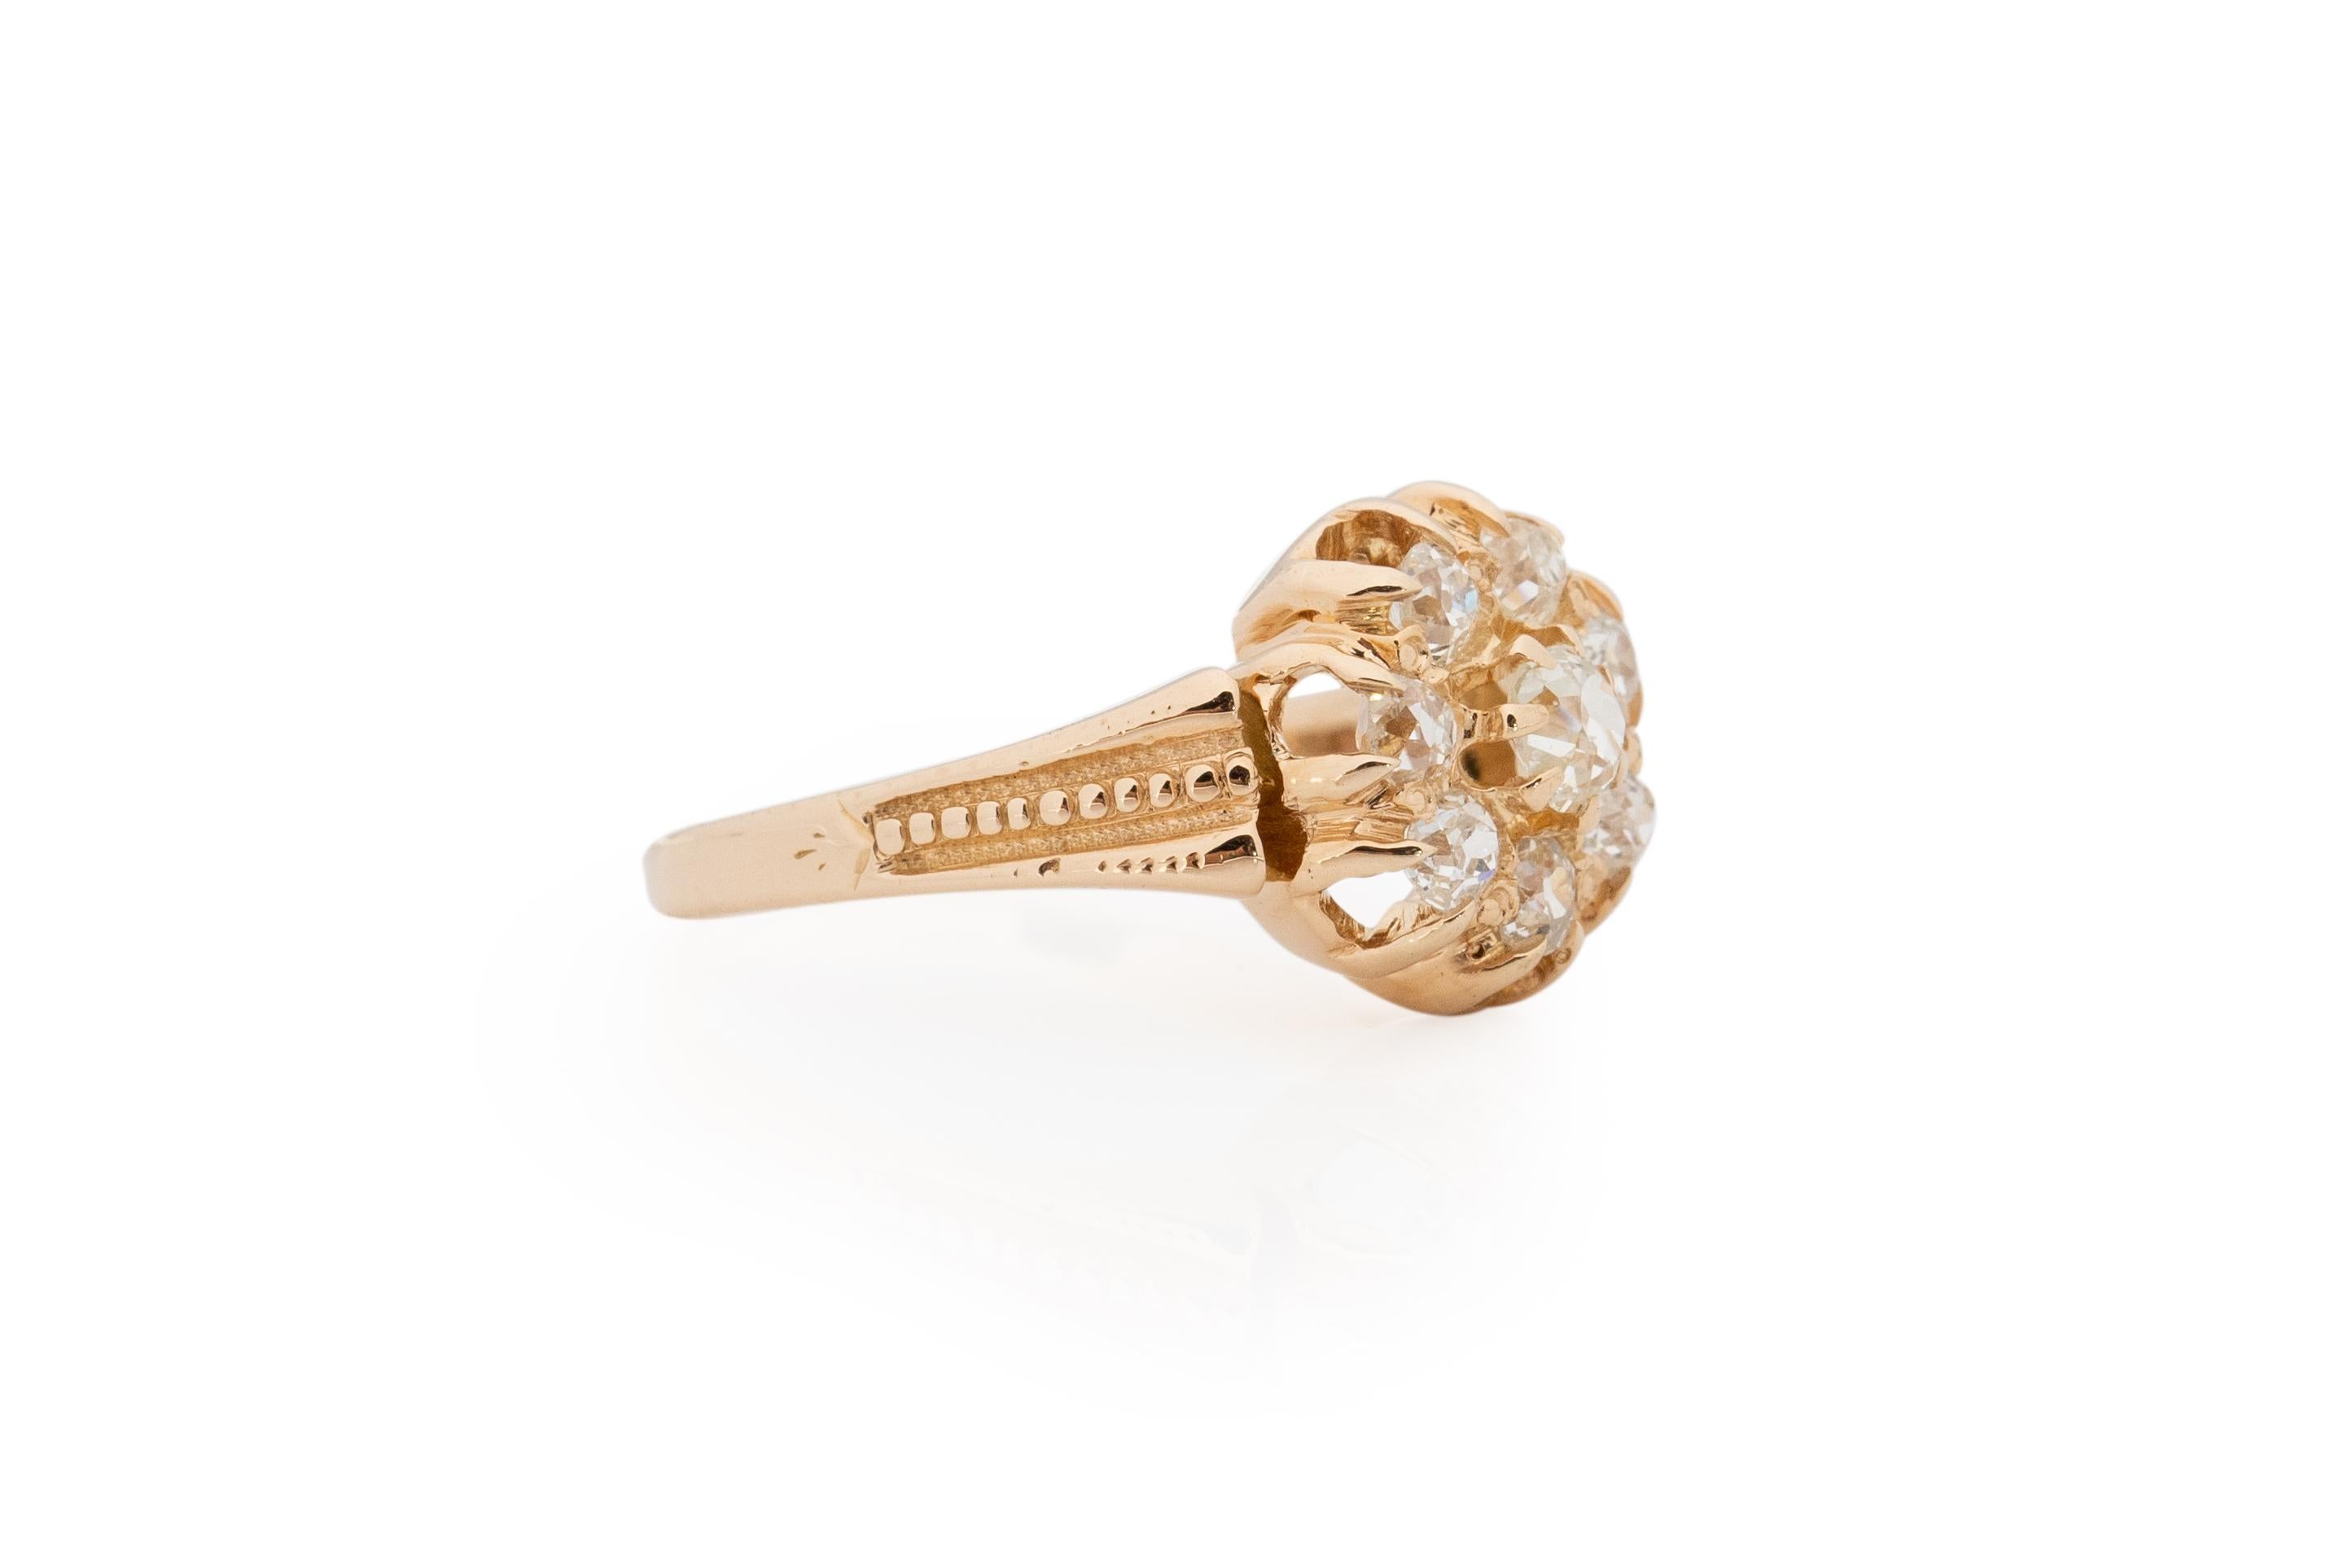 Ring Size: 5.5
Metal Type: 14 Karat Yellow Gold [Hallmarked, and Tested]
Weight: 4.0 grams

Diamond Details:
Weight: .55 carat, total weight
Cut: Old Mine Brilliant
Color: G-H
Clarity: VS

Finger to Top of Stone Measurement: 5mm
Condition: Excellent